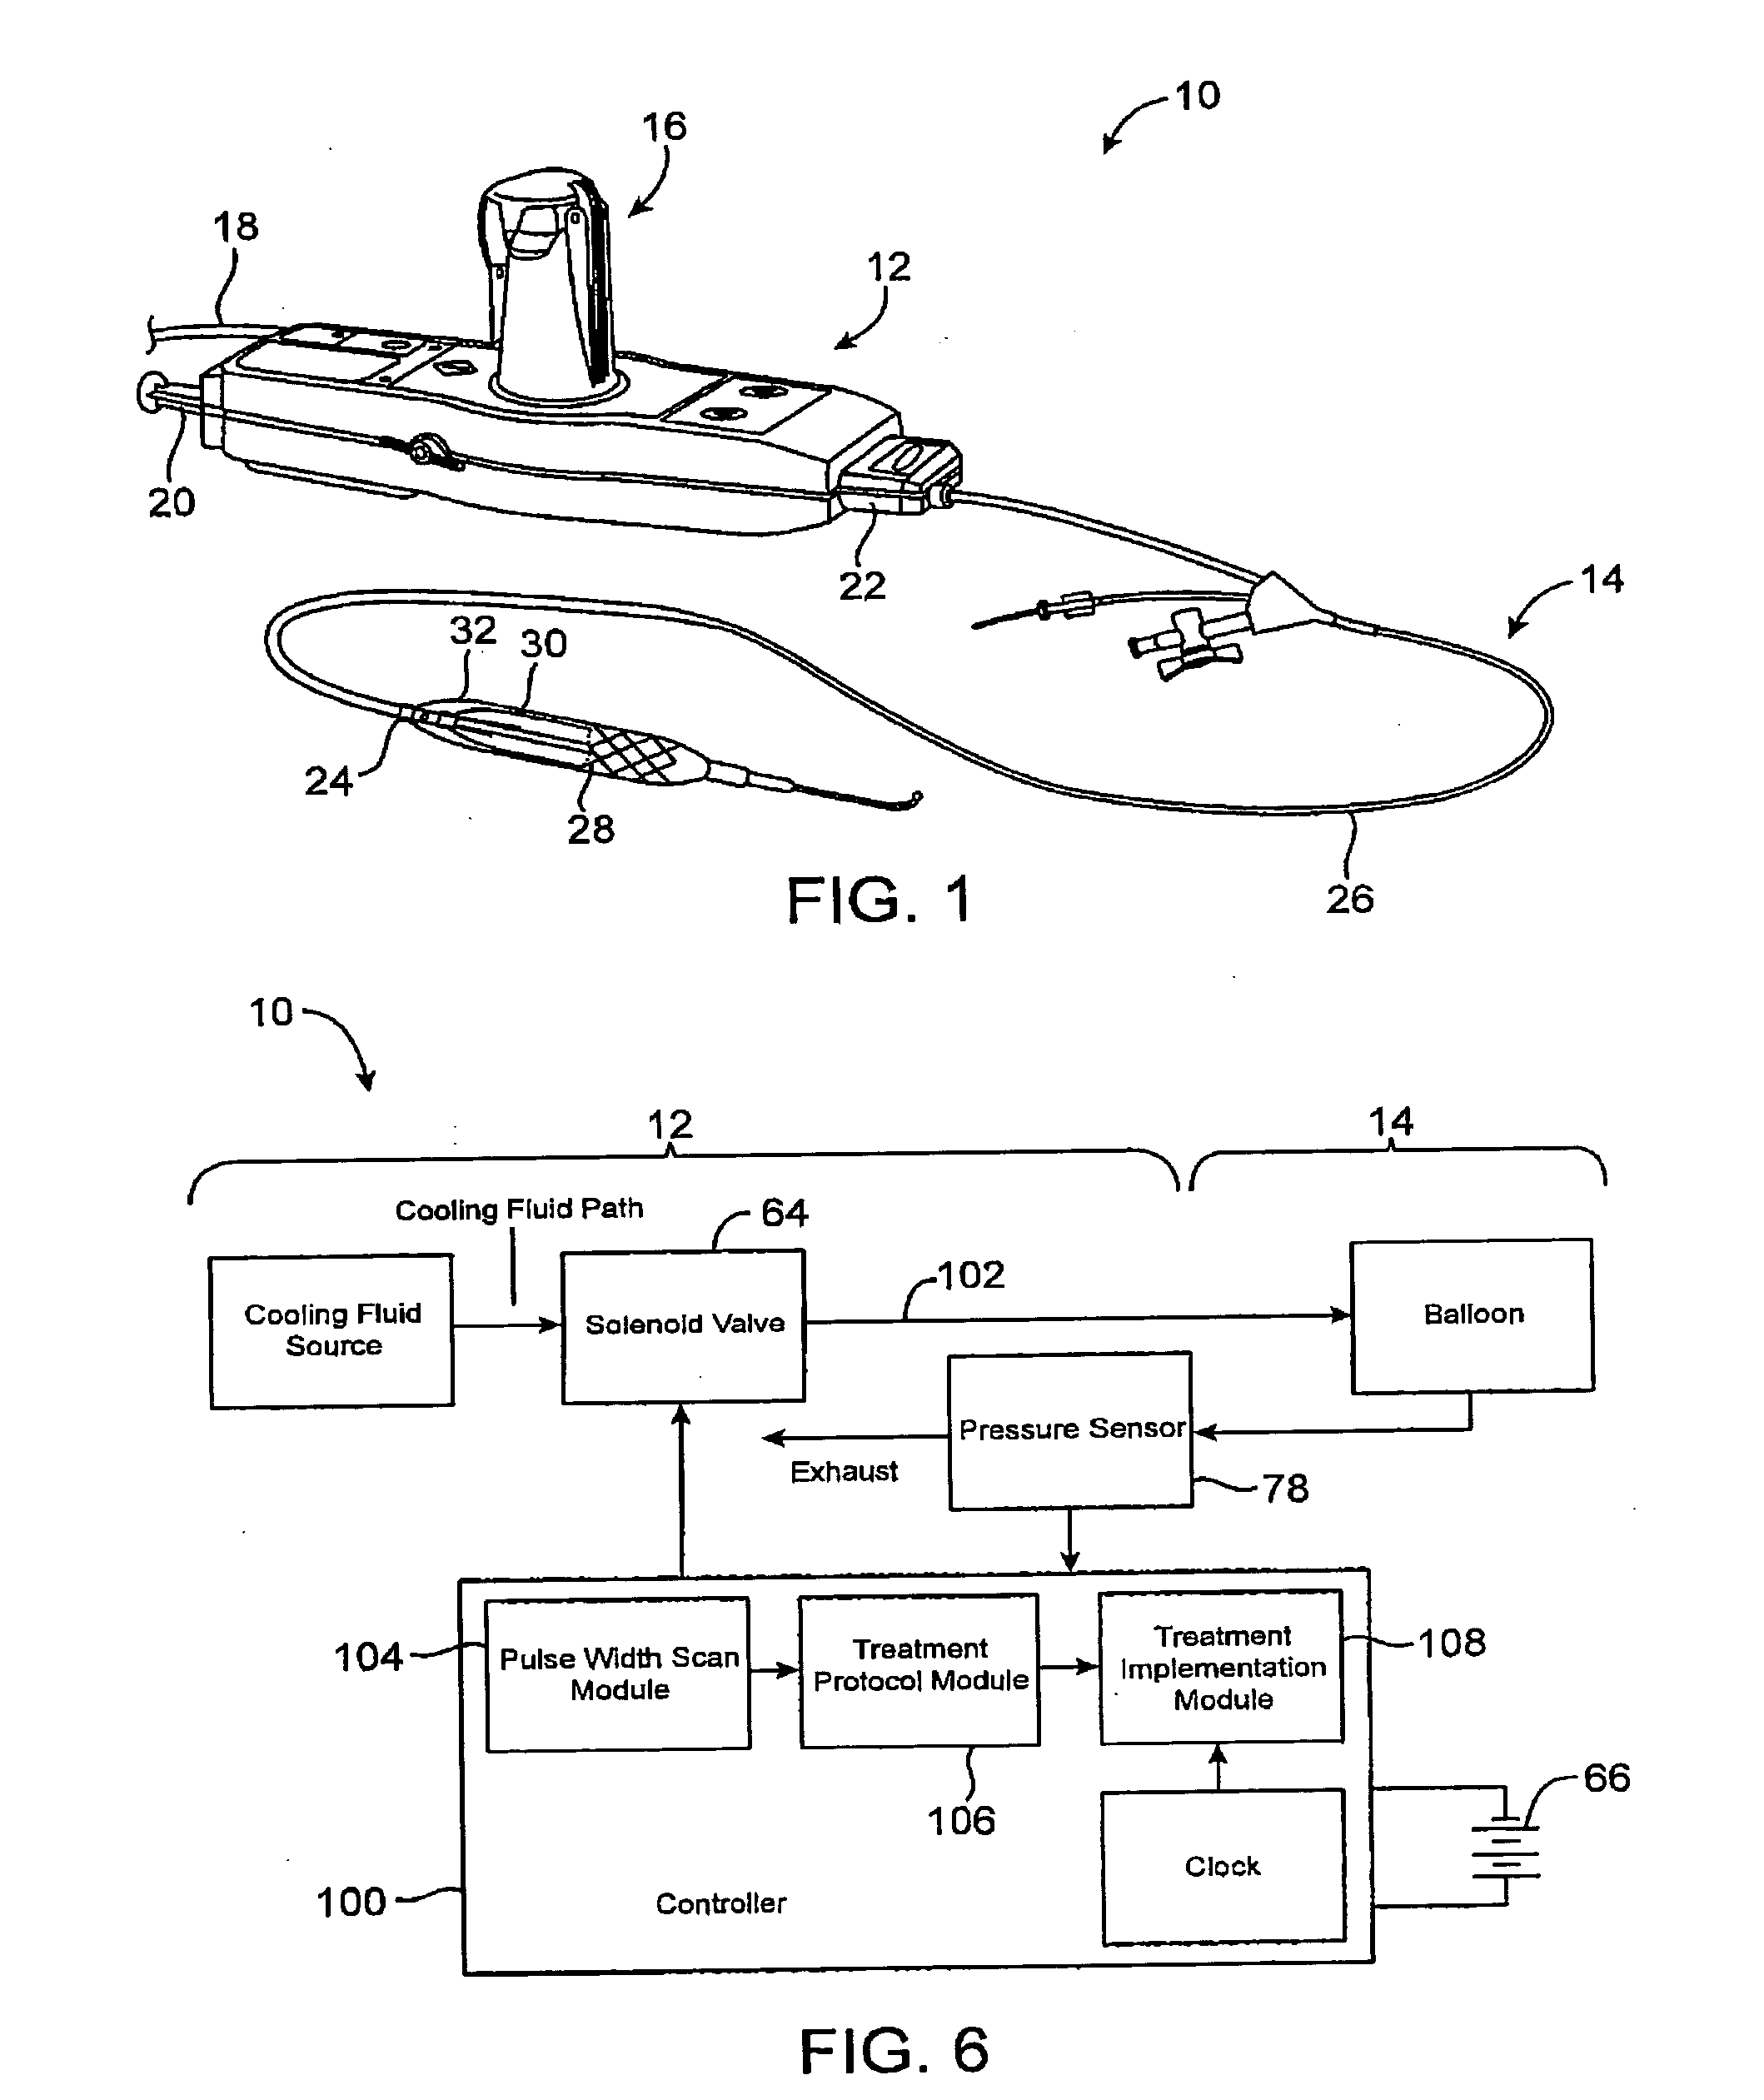 Efficient controlled cryogenic fluid delivery into a balloon catheter and other treatment devices